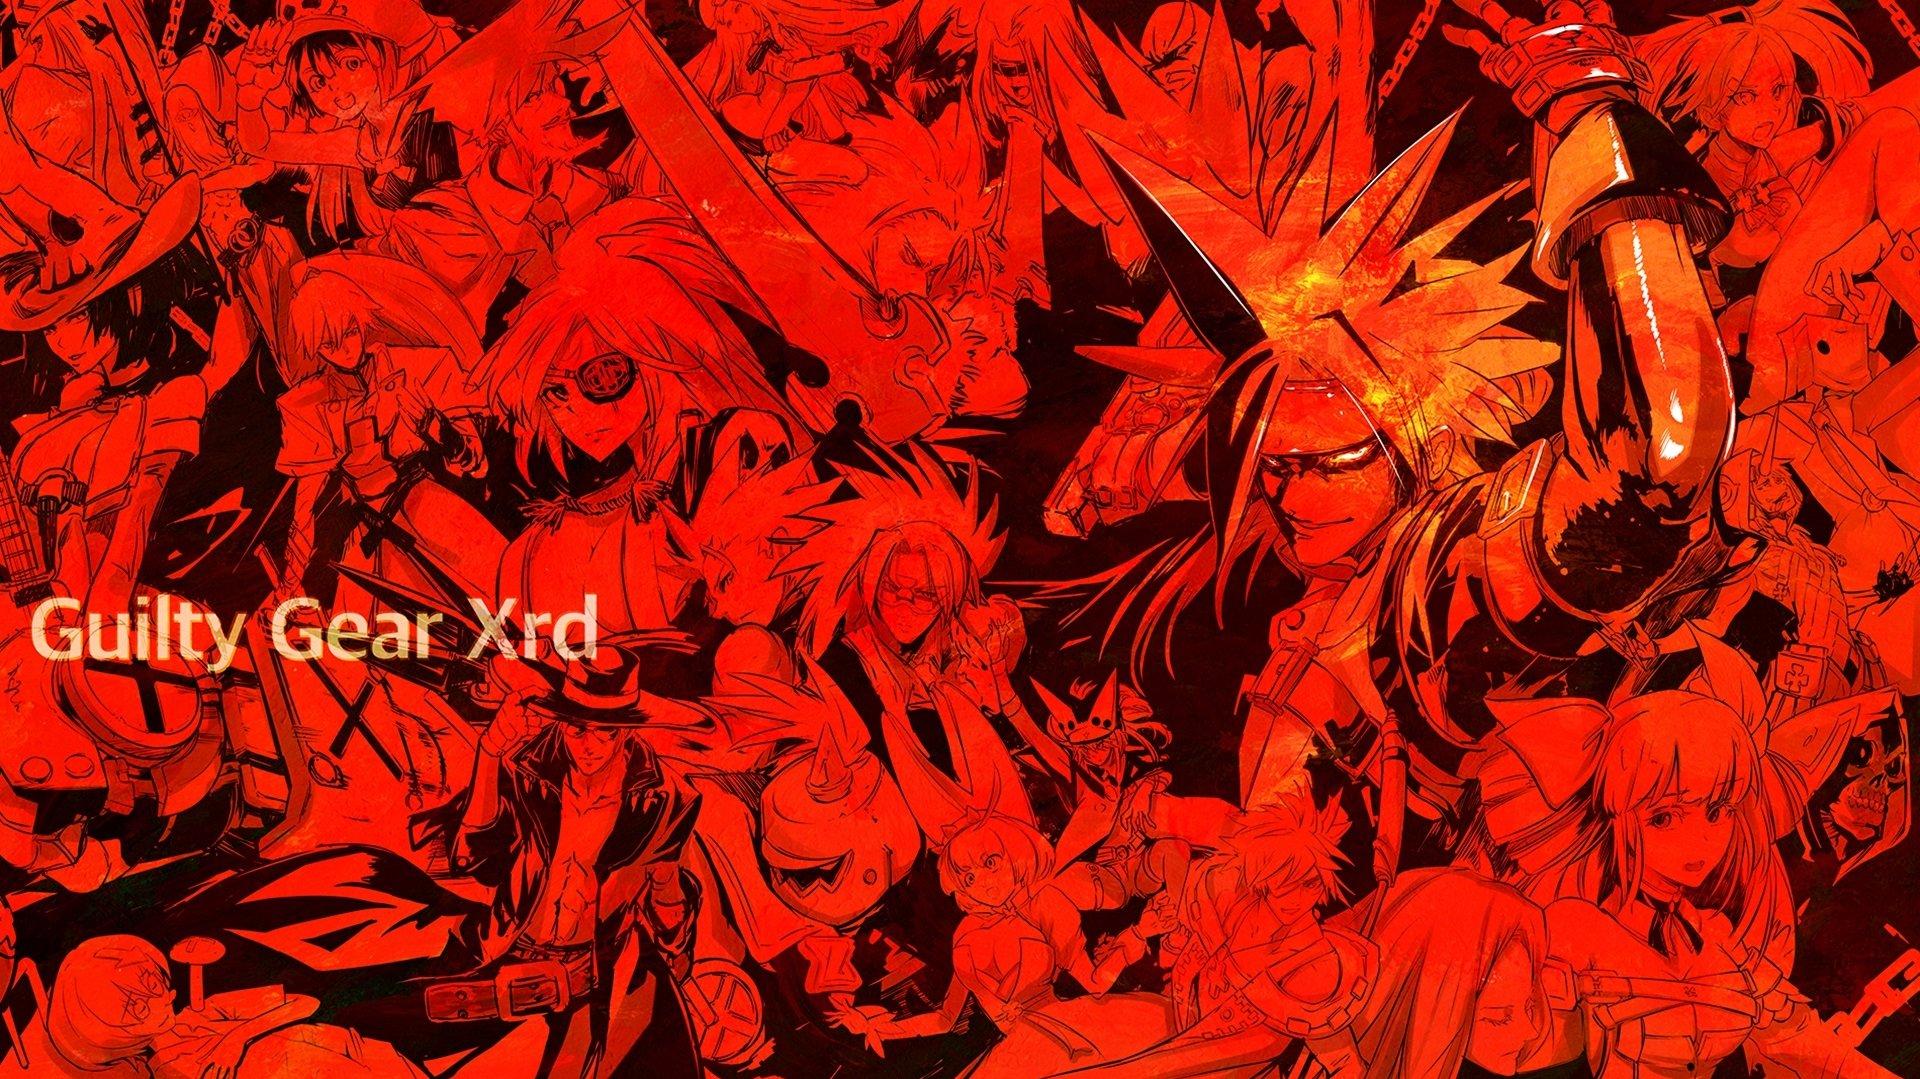 Slayer Guilty Gear HD Wallpaper And Background